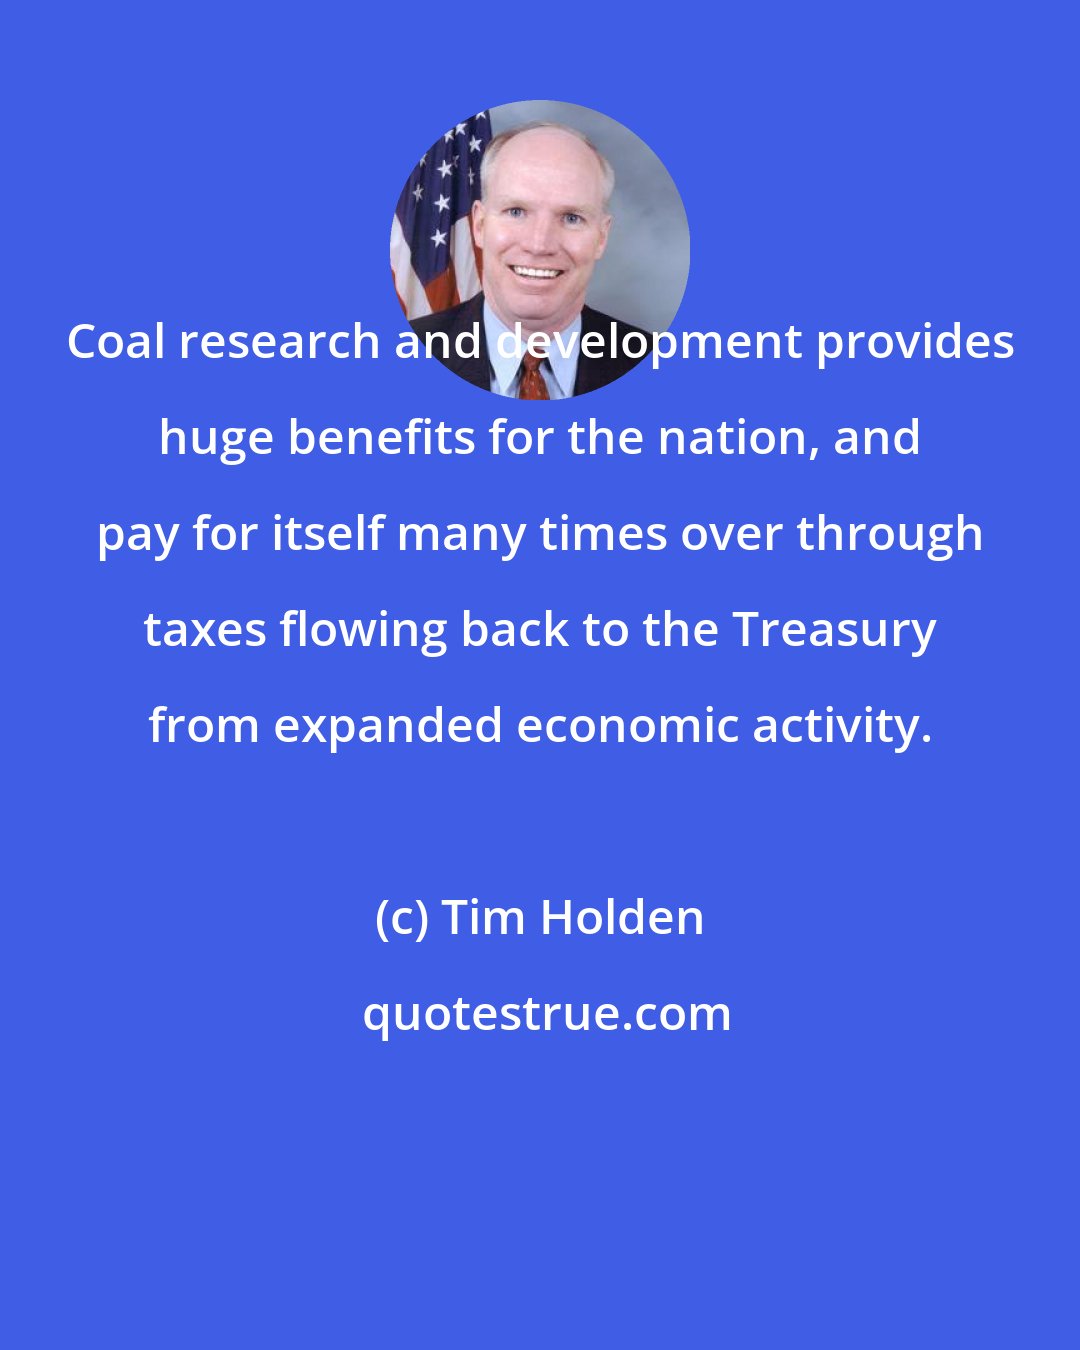 Tim Holden: Coal research and development provides huge benefits for the nation, and pay for itself many times over through taxes flowing back to the Treasury from expanded economic activity.